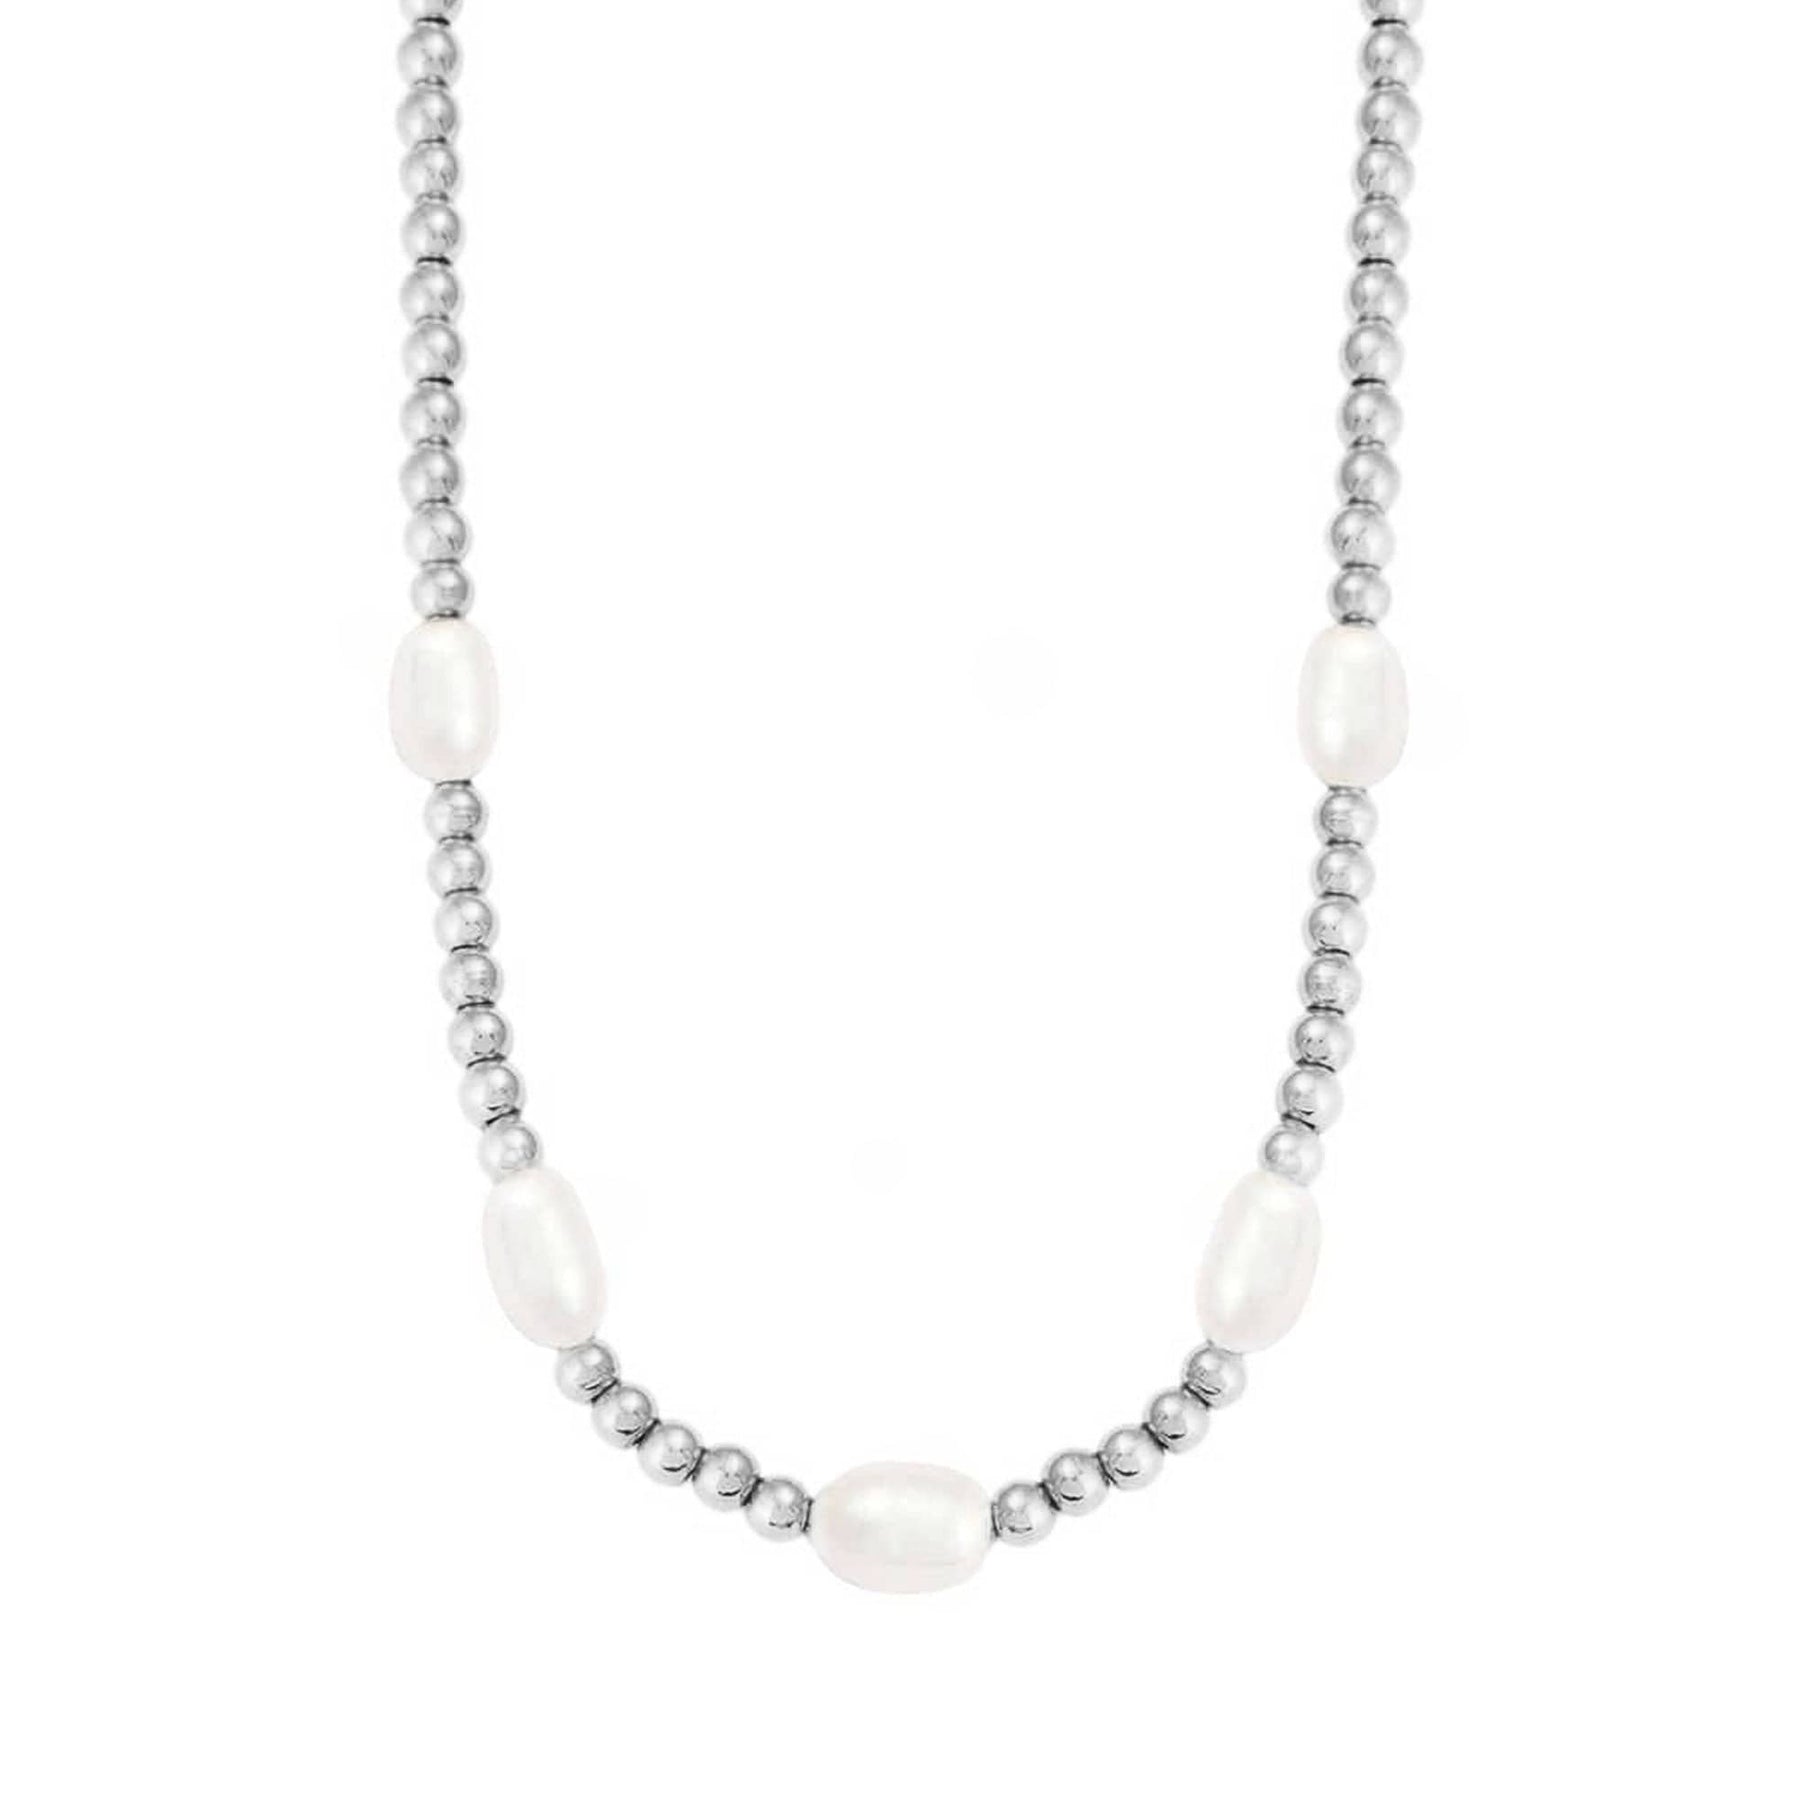 BohoMoon Stainless Steel Palm Springs Pearl Necklace Silver